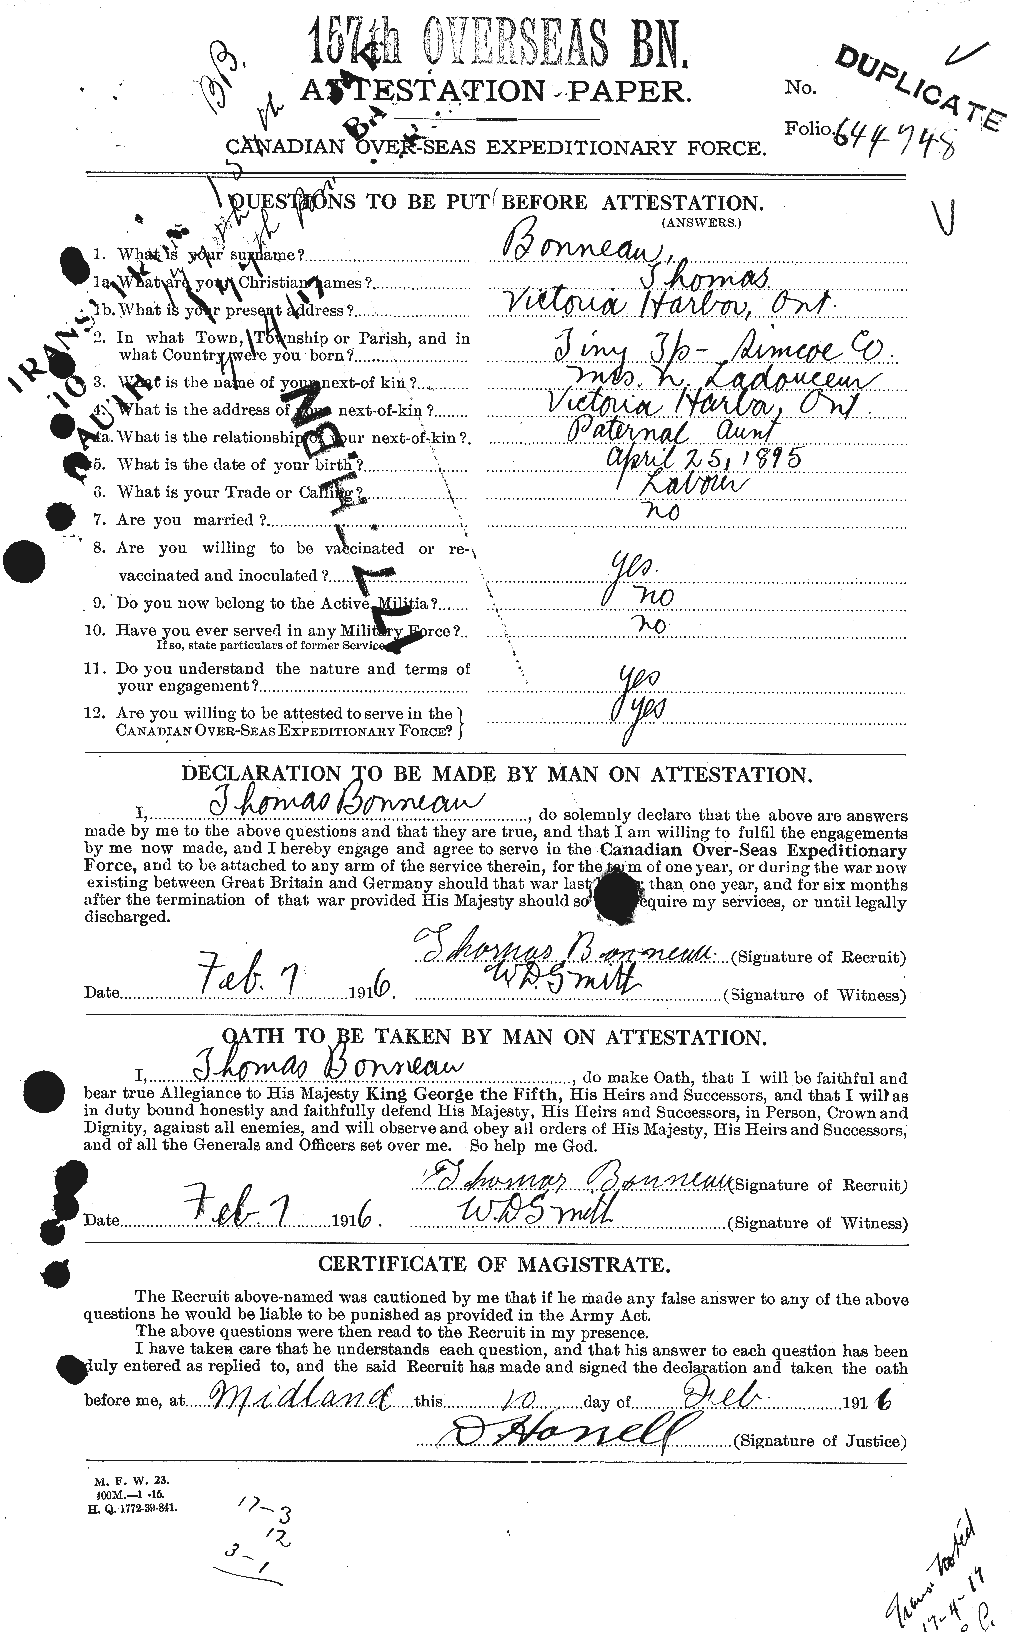 Personnel Records of the First World War - CEF 250723a